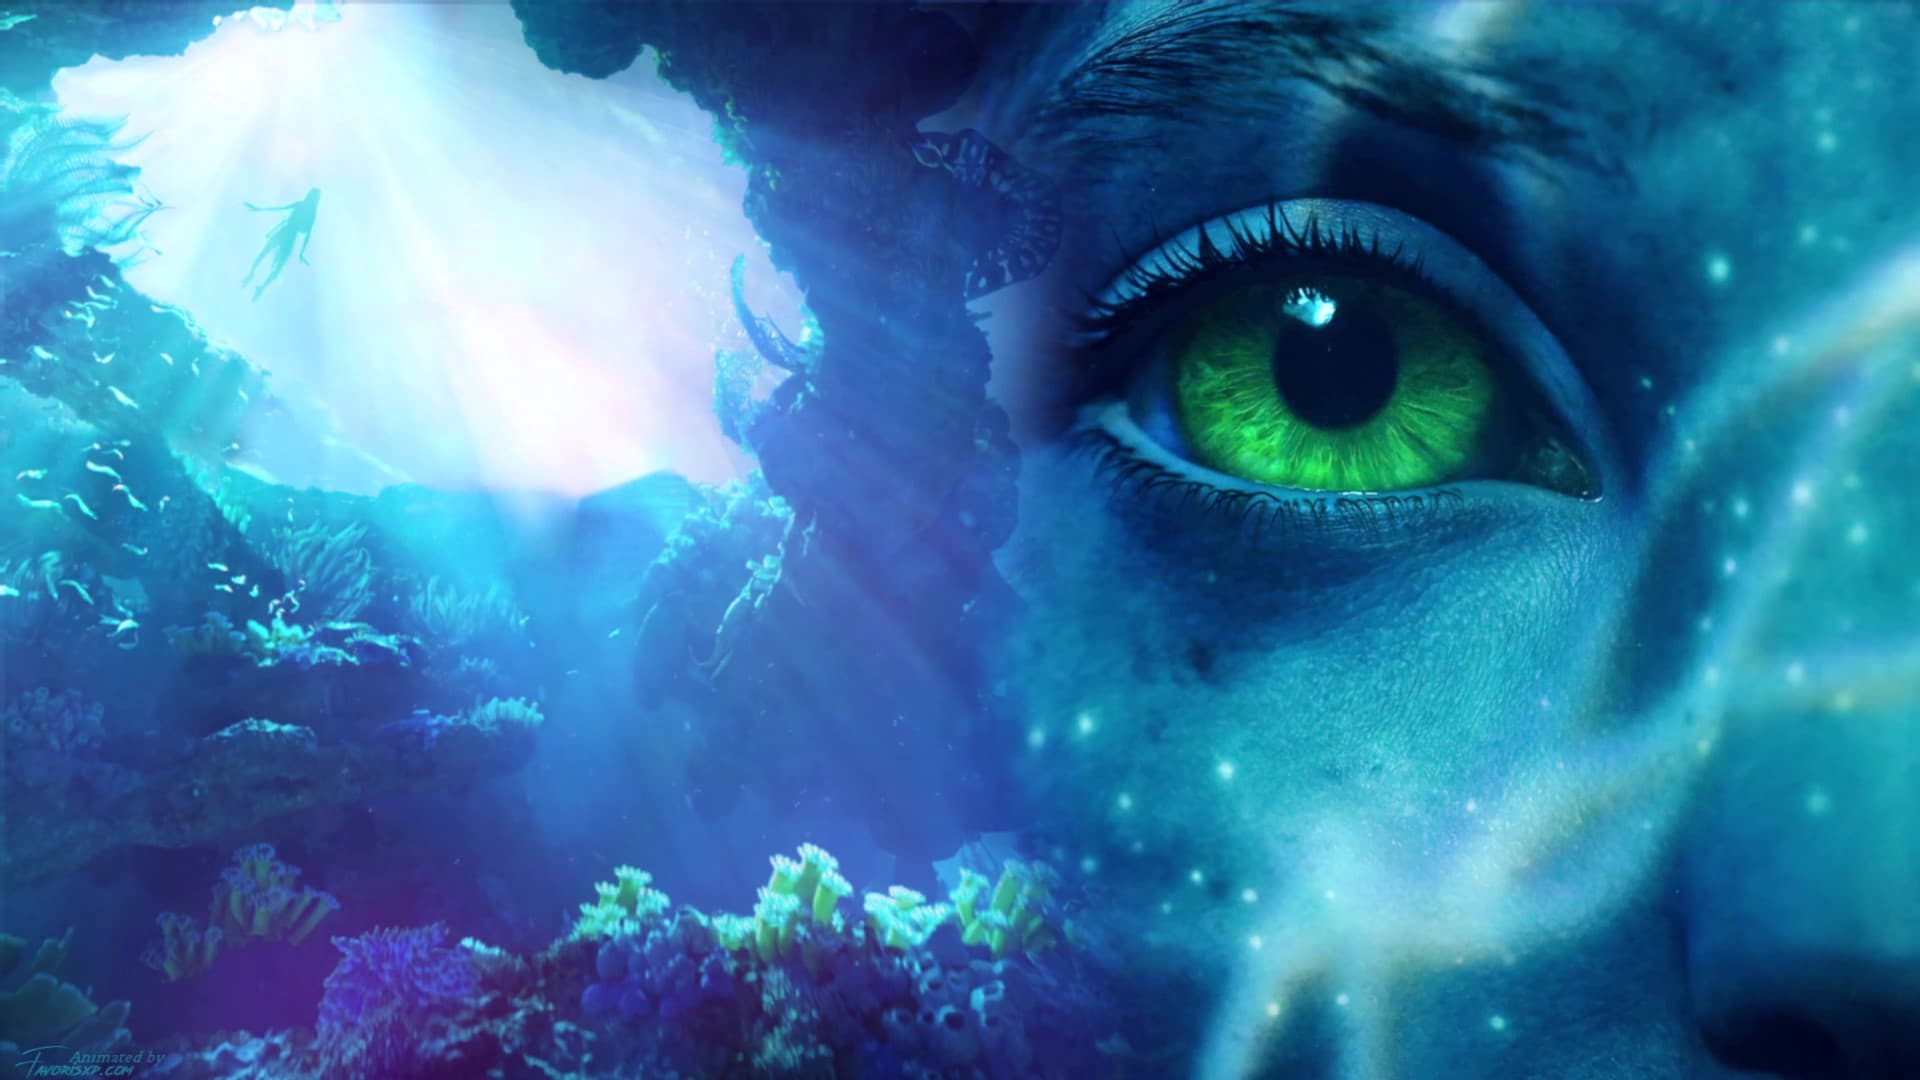 AVATAR 2 the way of water Animated Wallpaper